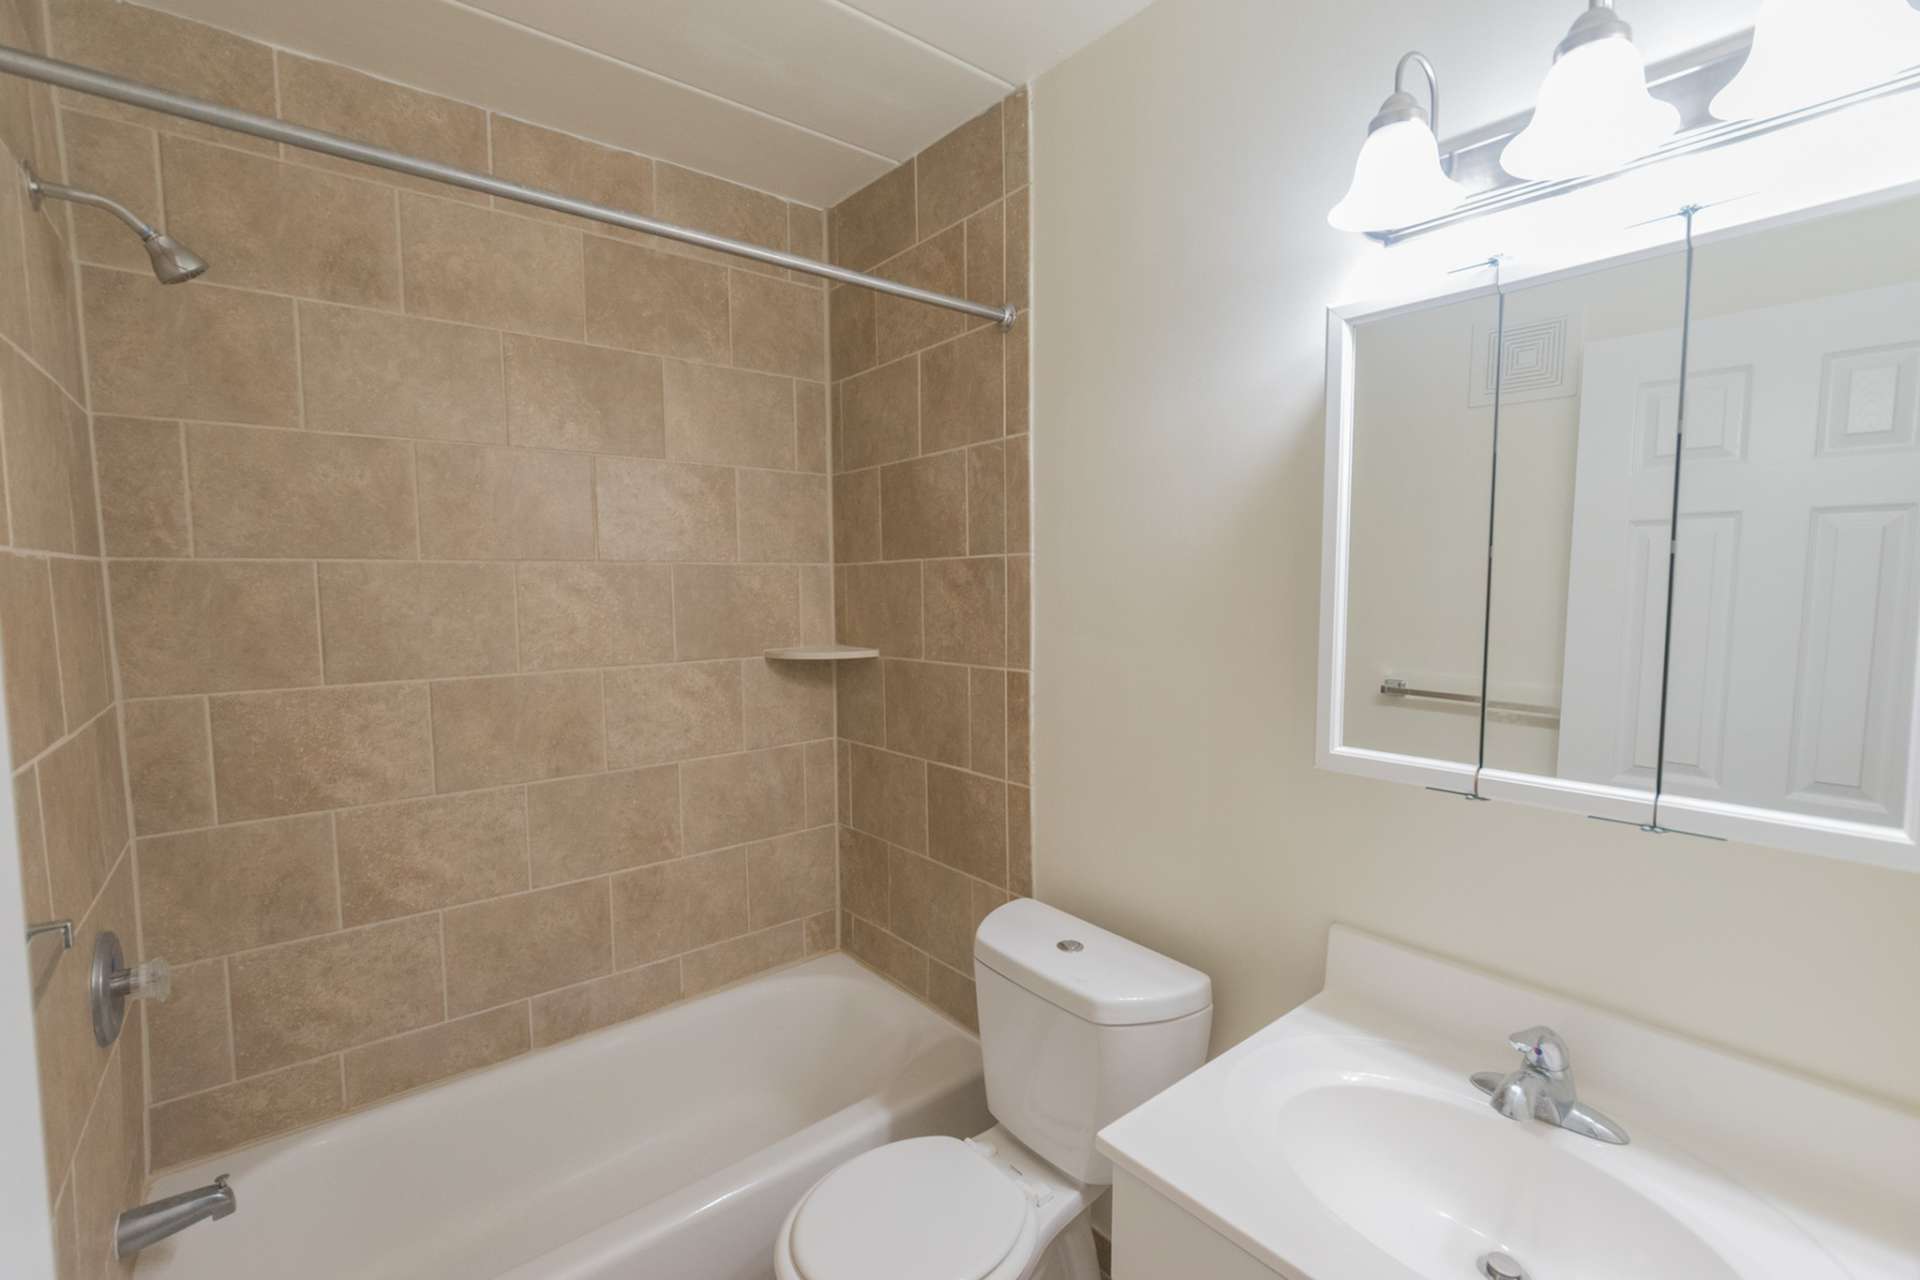 Bathroom with light brown tiles, a bathtub, a mirror, a sink, and vanity lights.